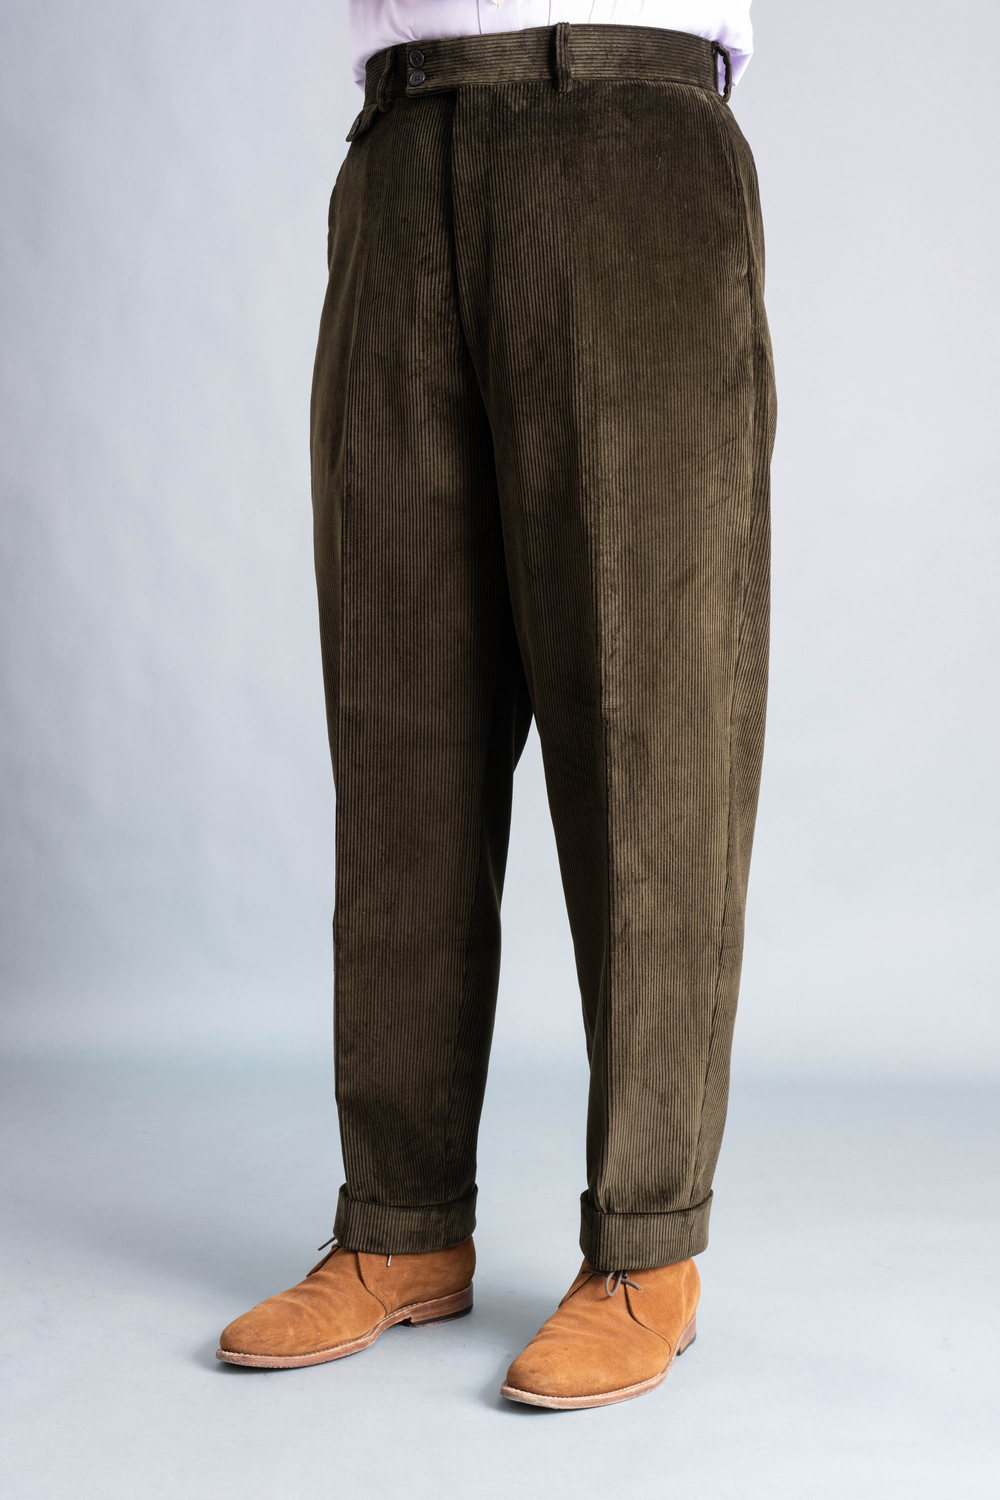 Dark Olive Corduroy Trousers -Stancliffe Flat-Front in 8-Wale